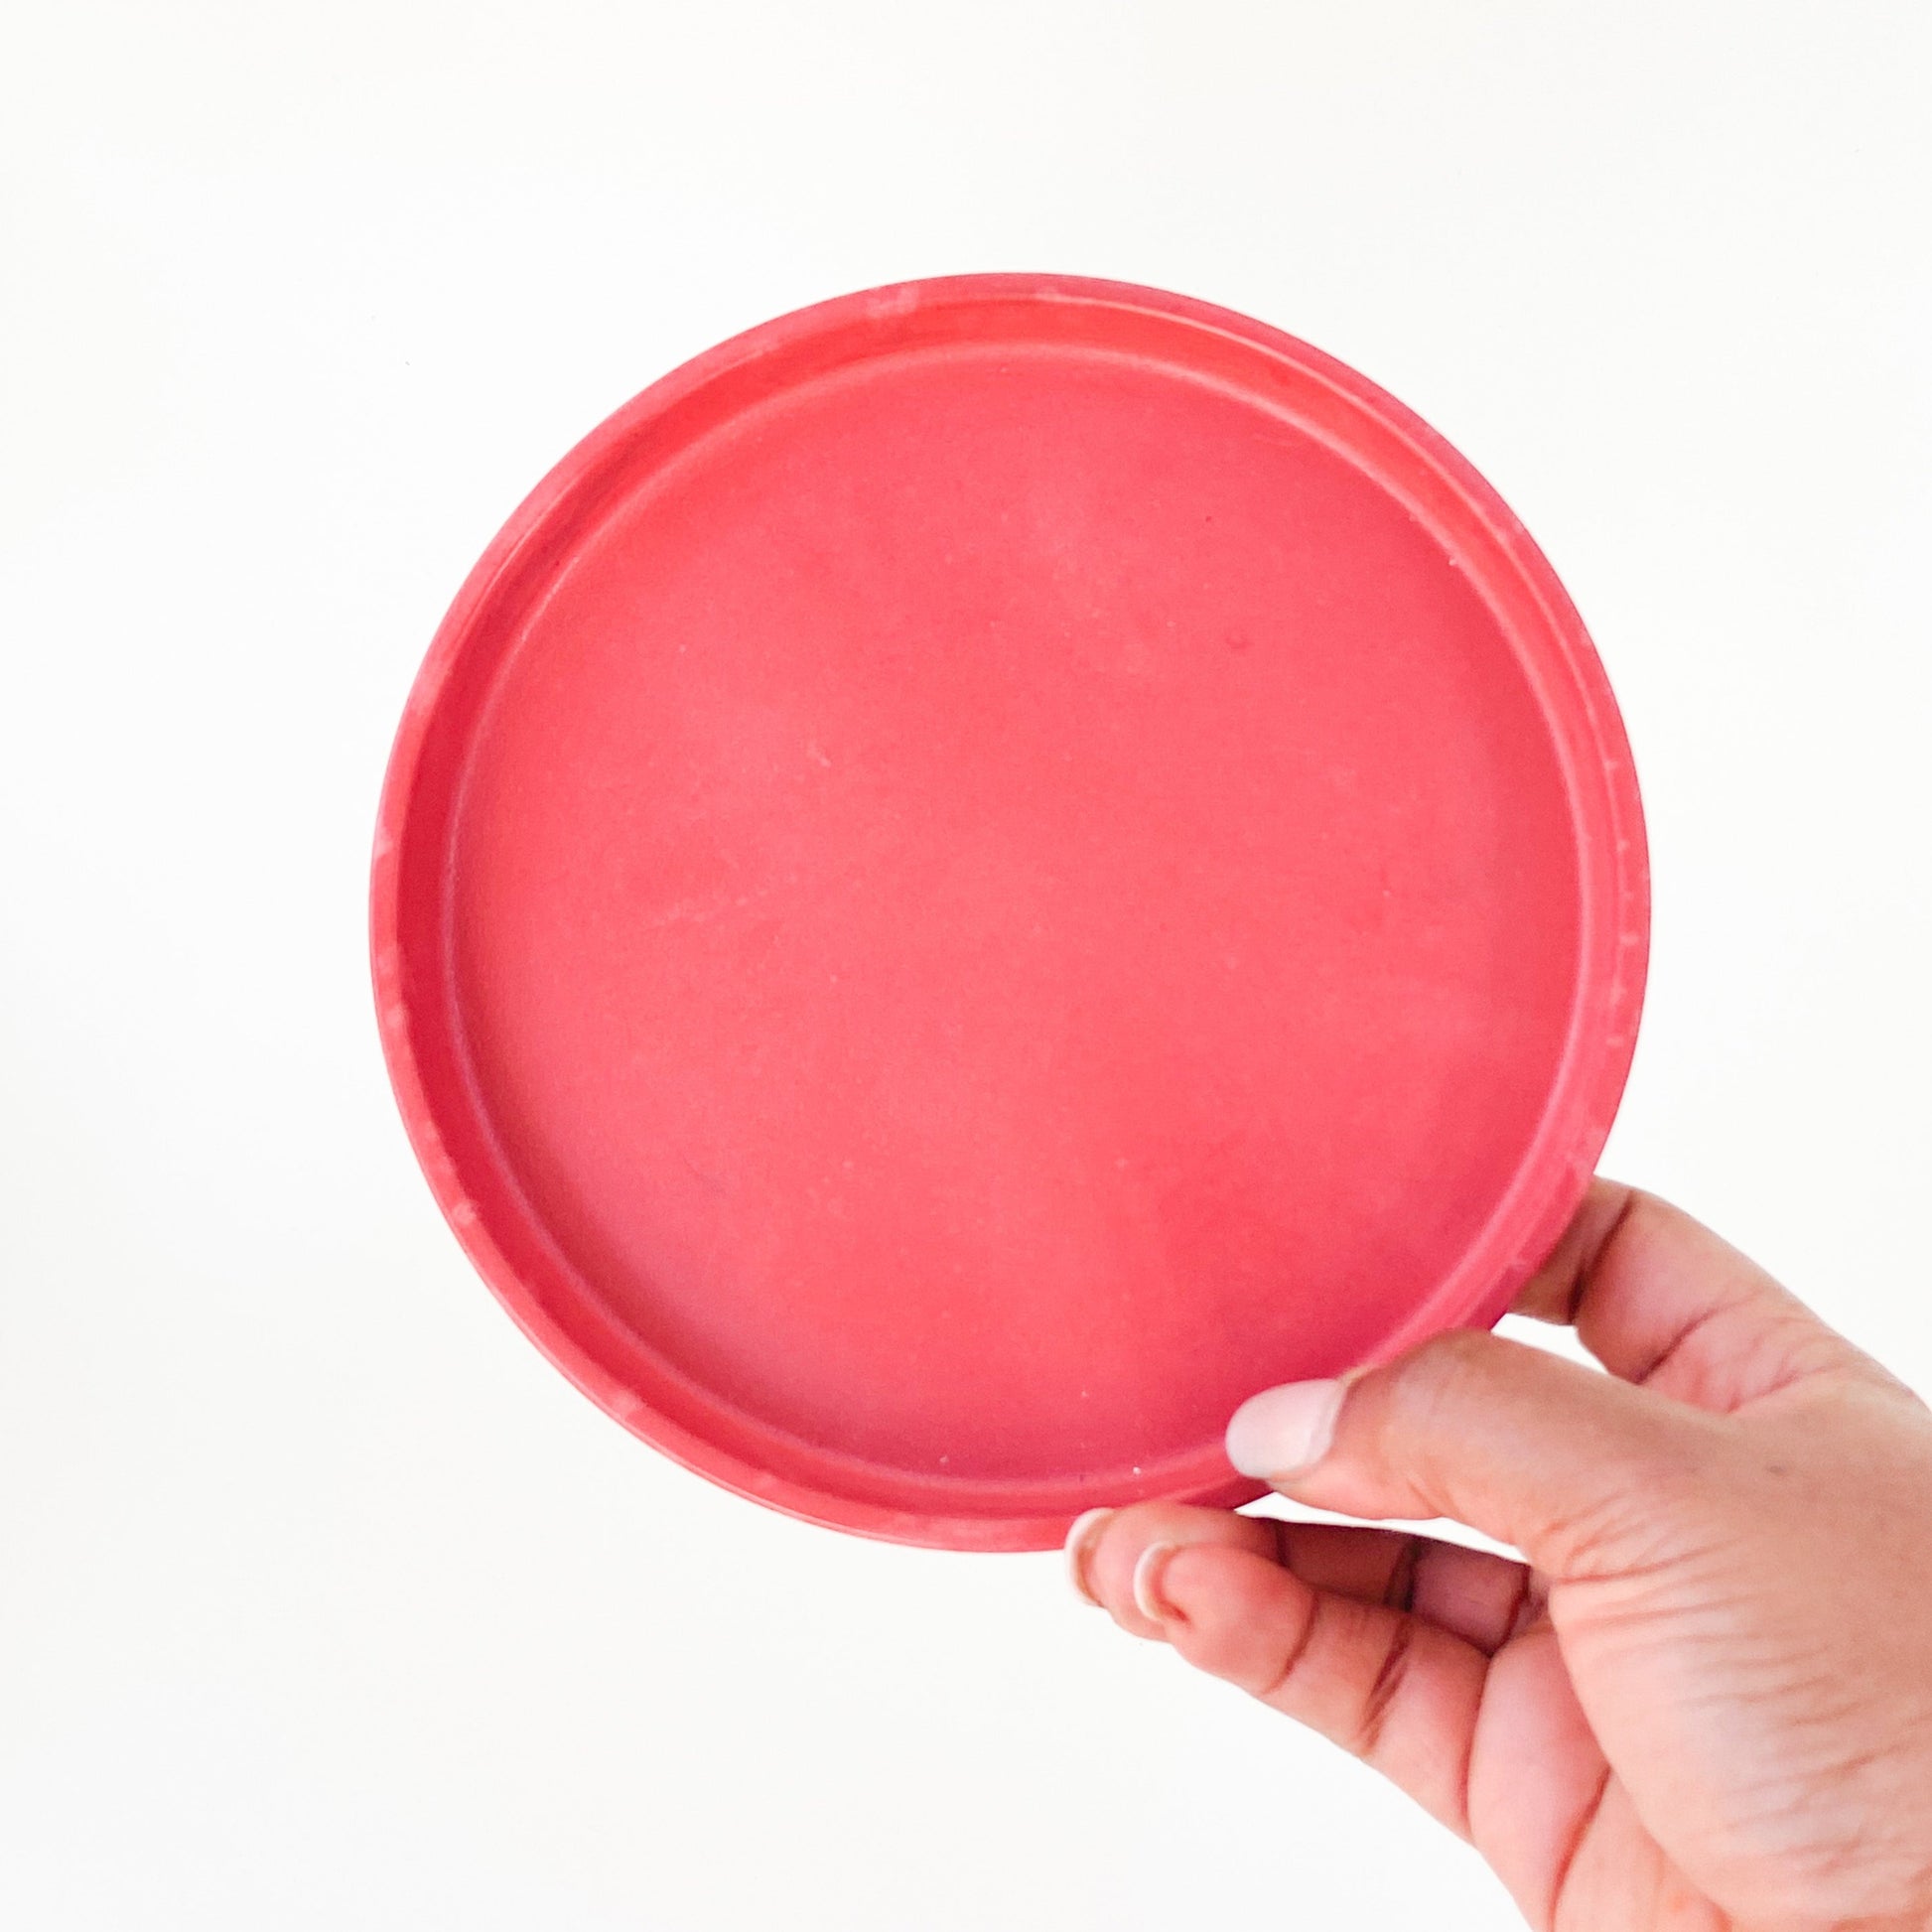 Hand holding a red round catch all tray